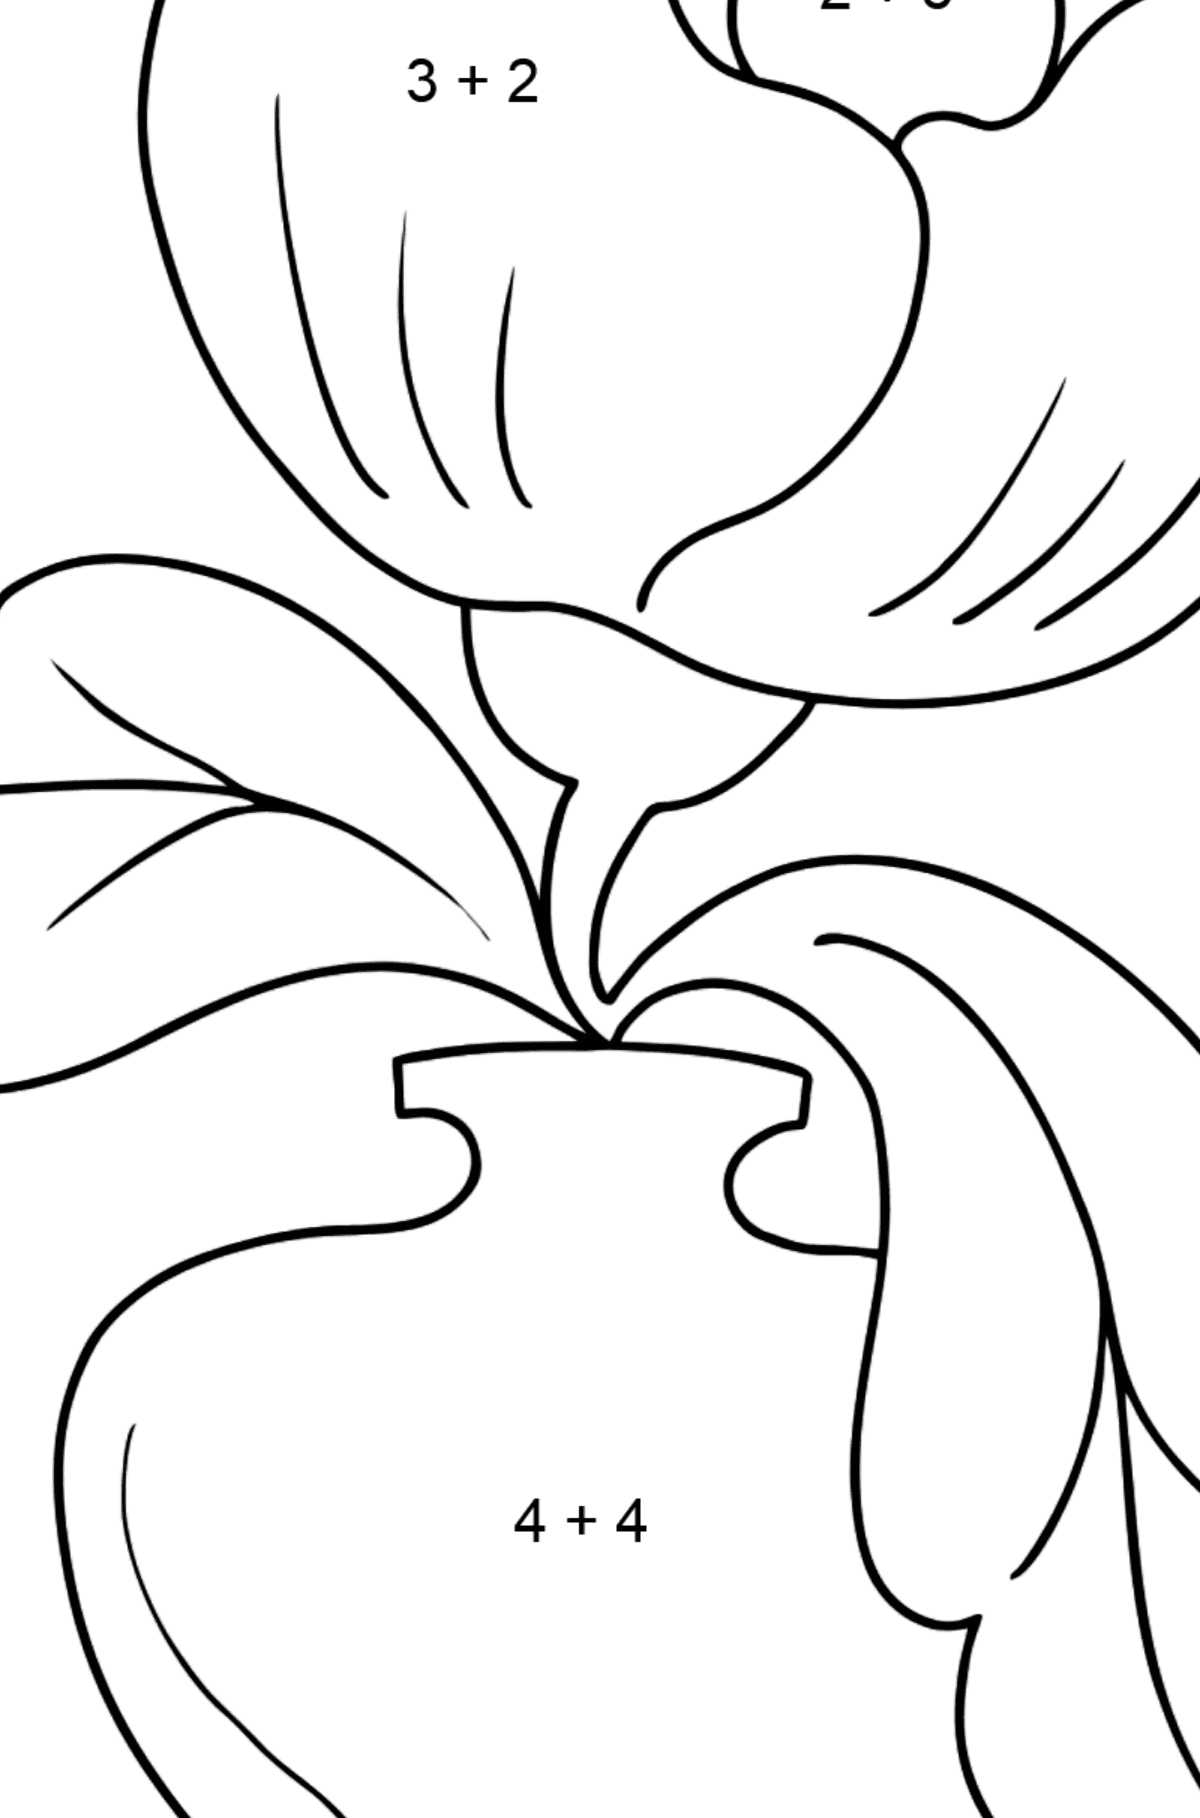 Coloring Page - flowers in a vase - Math Coloring - Addition for Kids